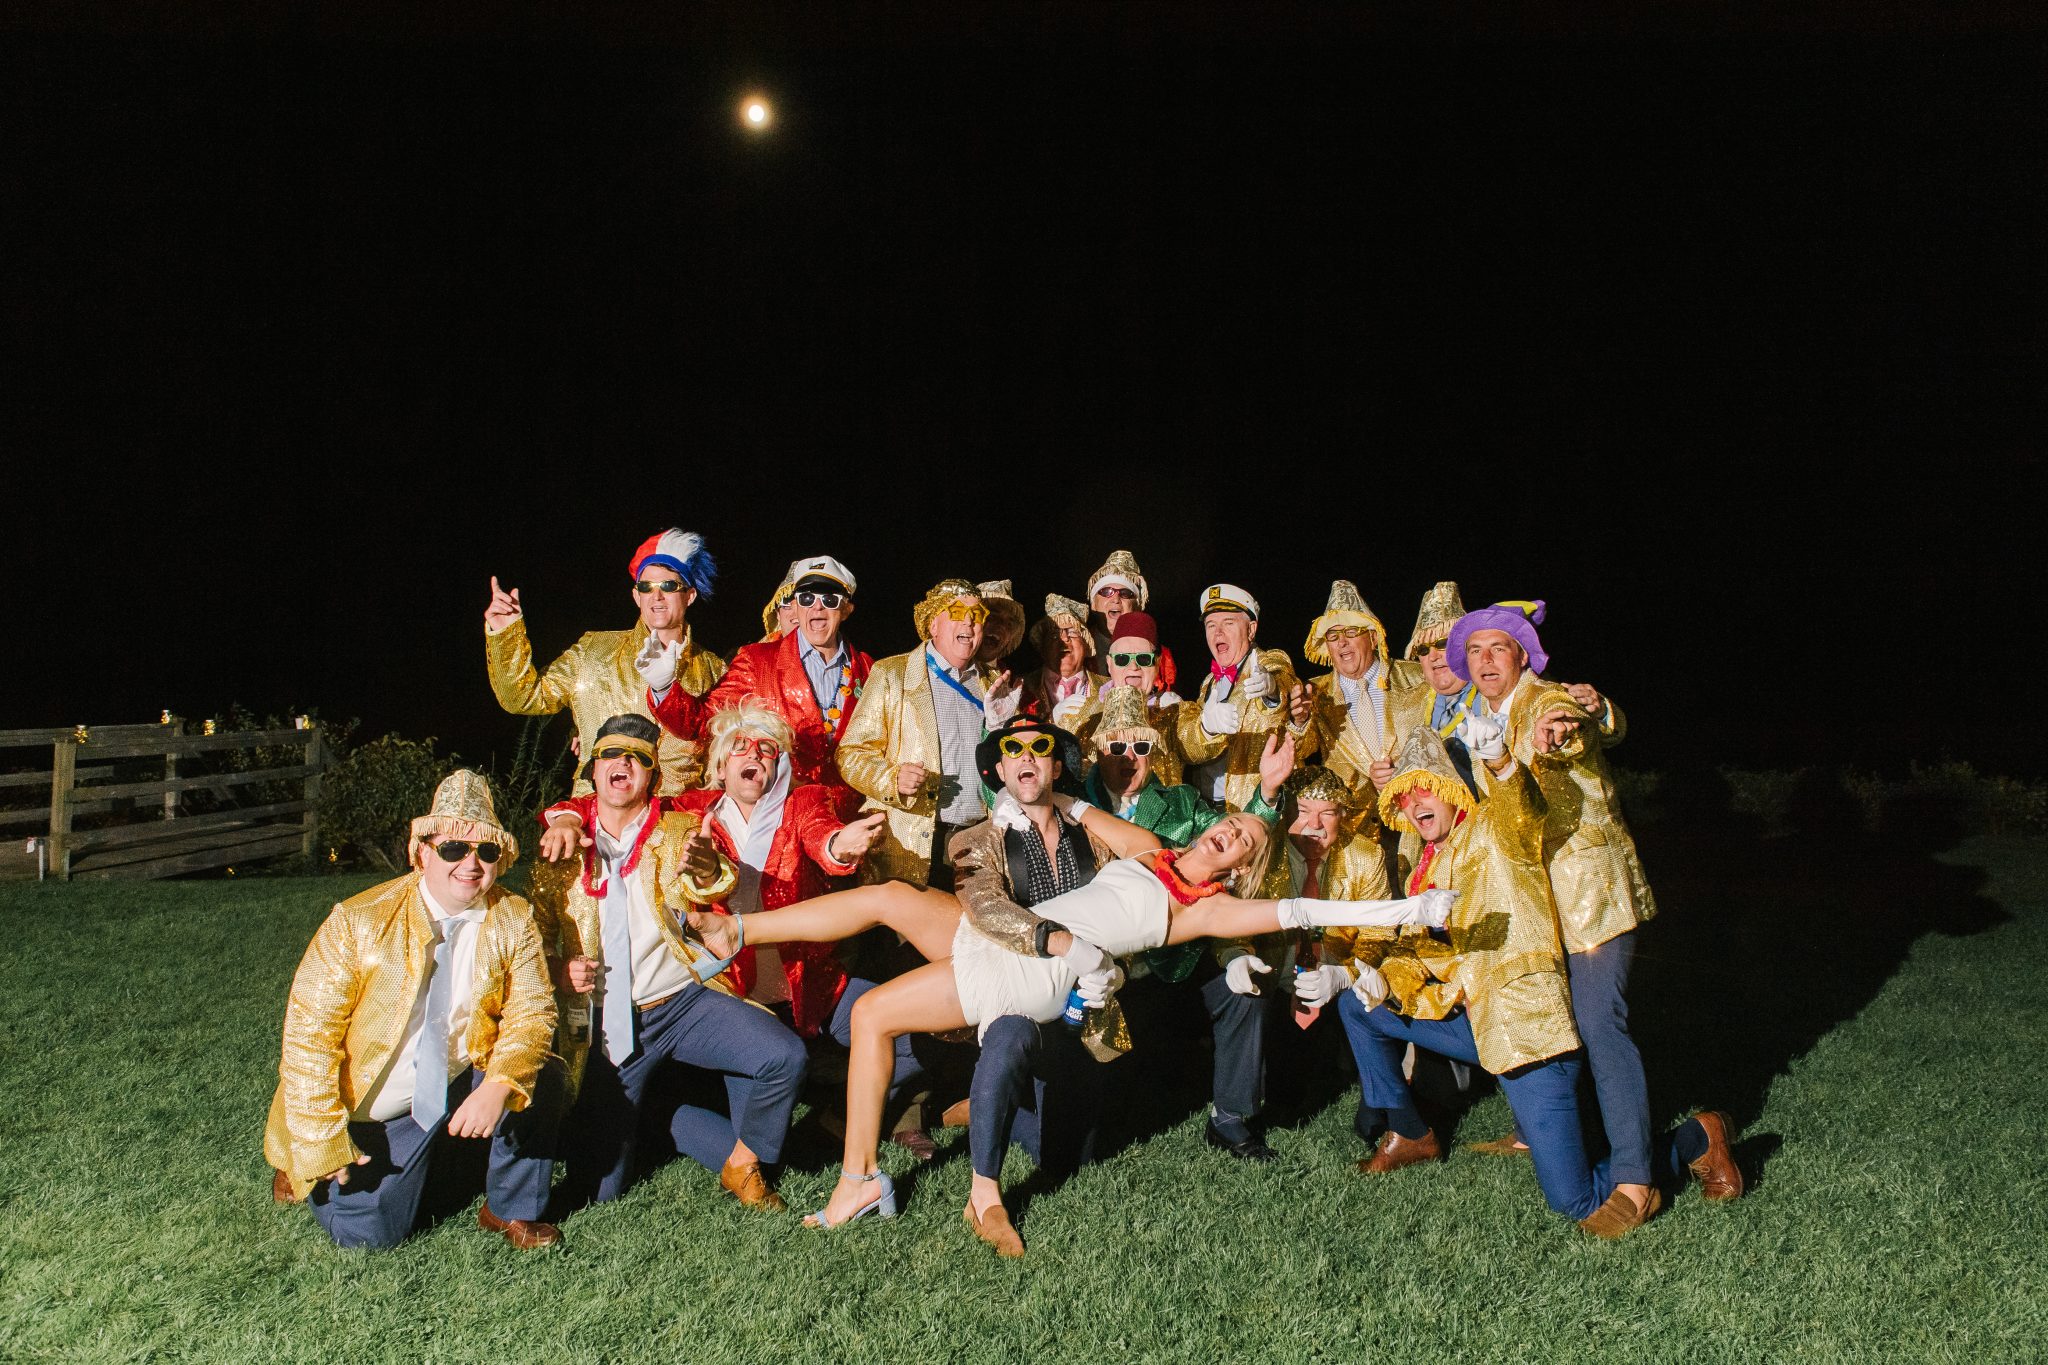 Wedding Photography Tips: How to Take Gorgeous Indoor Wedding Photos by popular New England photographer, Shannon Shipman: image of a a group of people dressed in silly costumes and standing together as a group. 